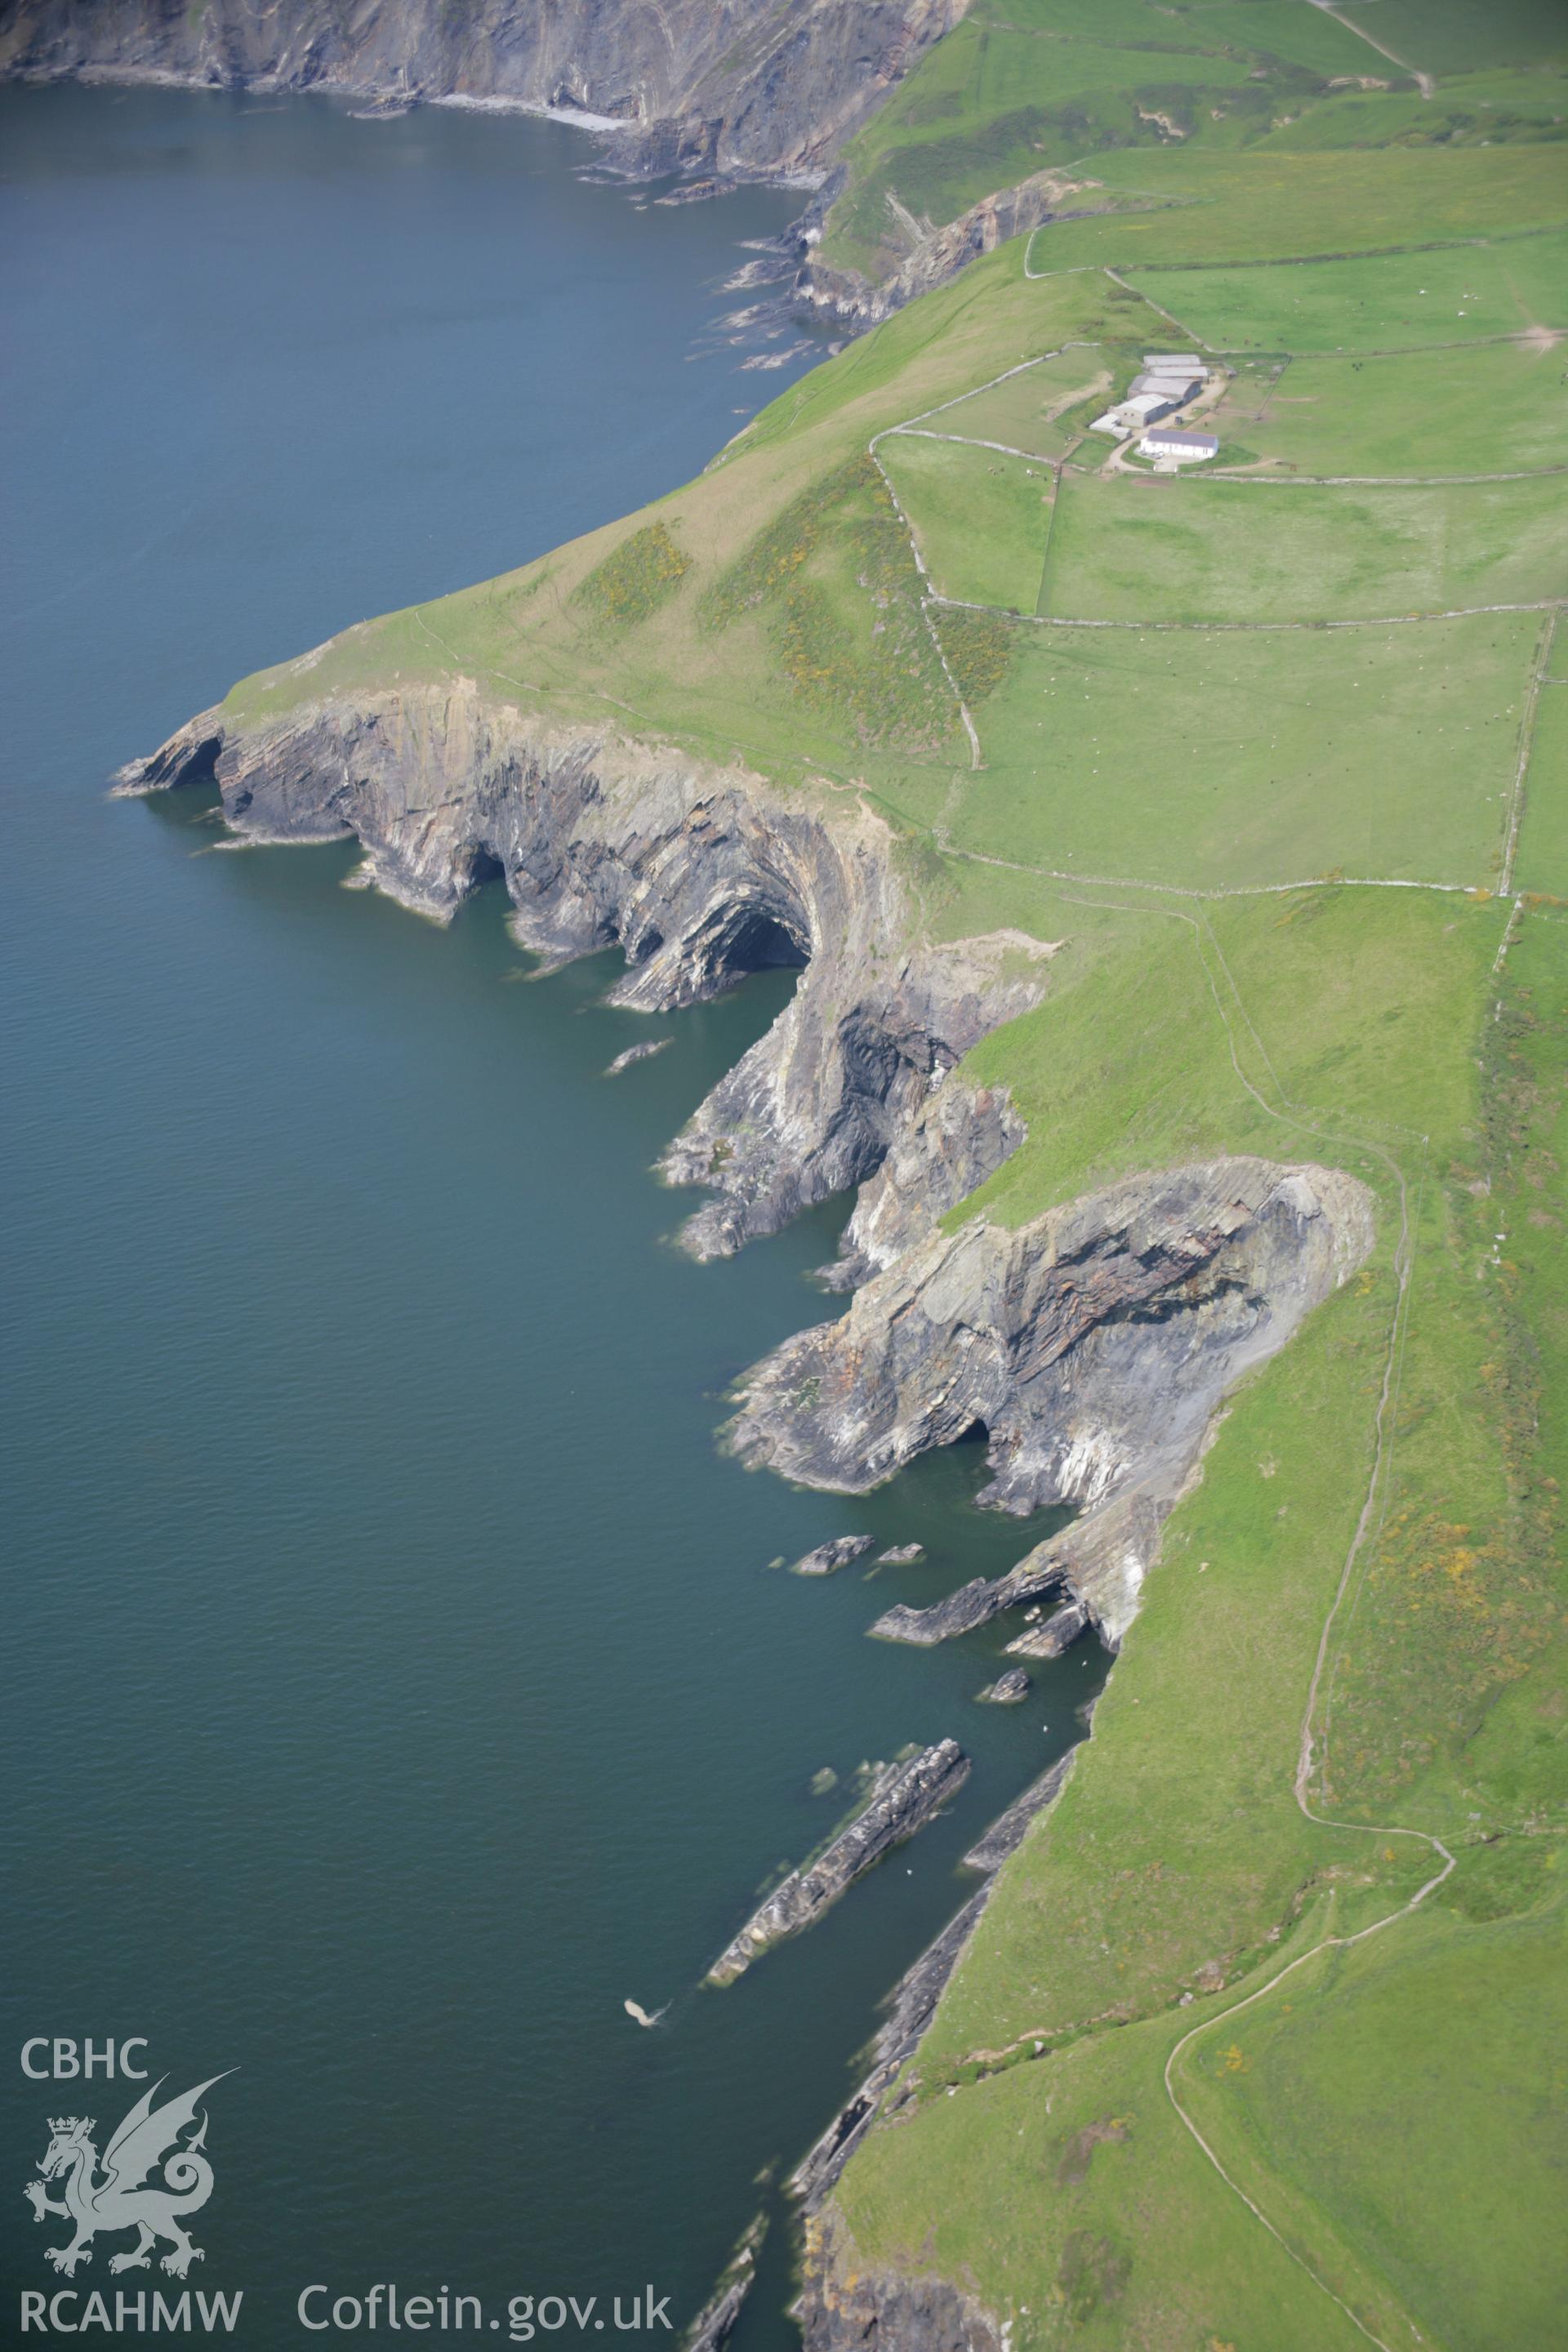 RCAHMW colour oblique aerial photograph of the Pembrokeshire Coast Path between Ceibwr Bay and Foel Hendre, from the south-west and showing the geology of the area. Taken on 08 June 2006 by Toby Driver.